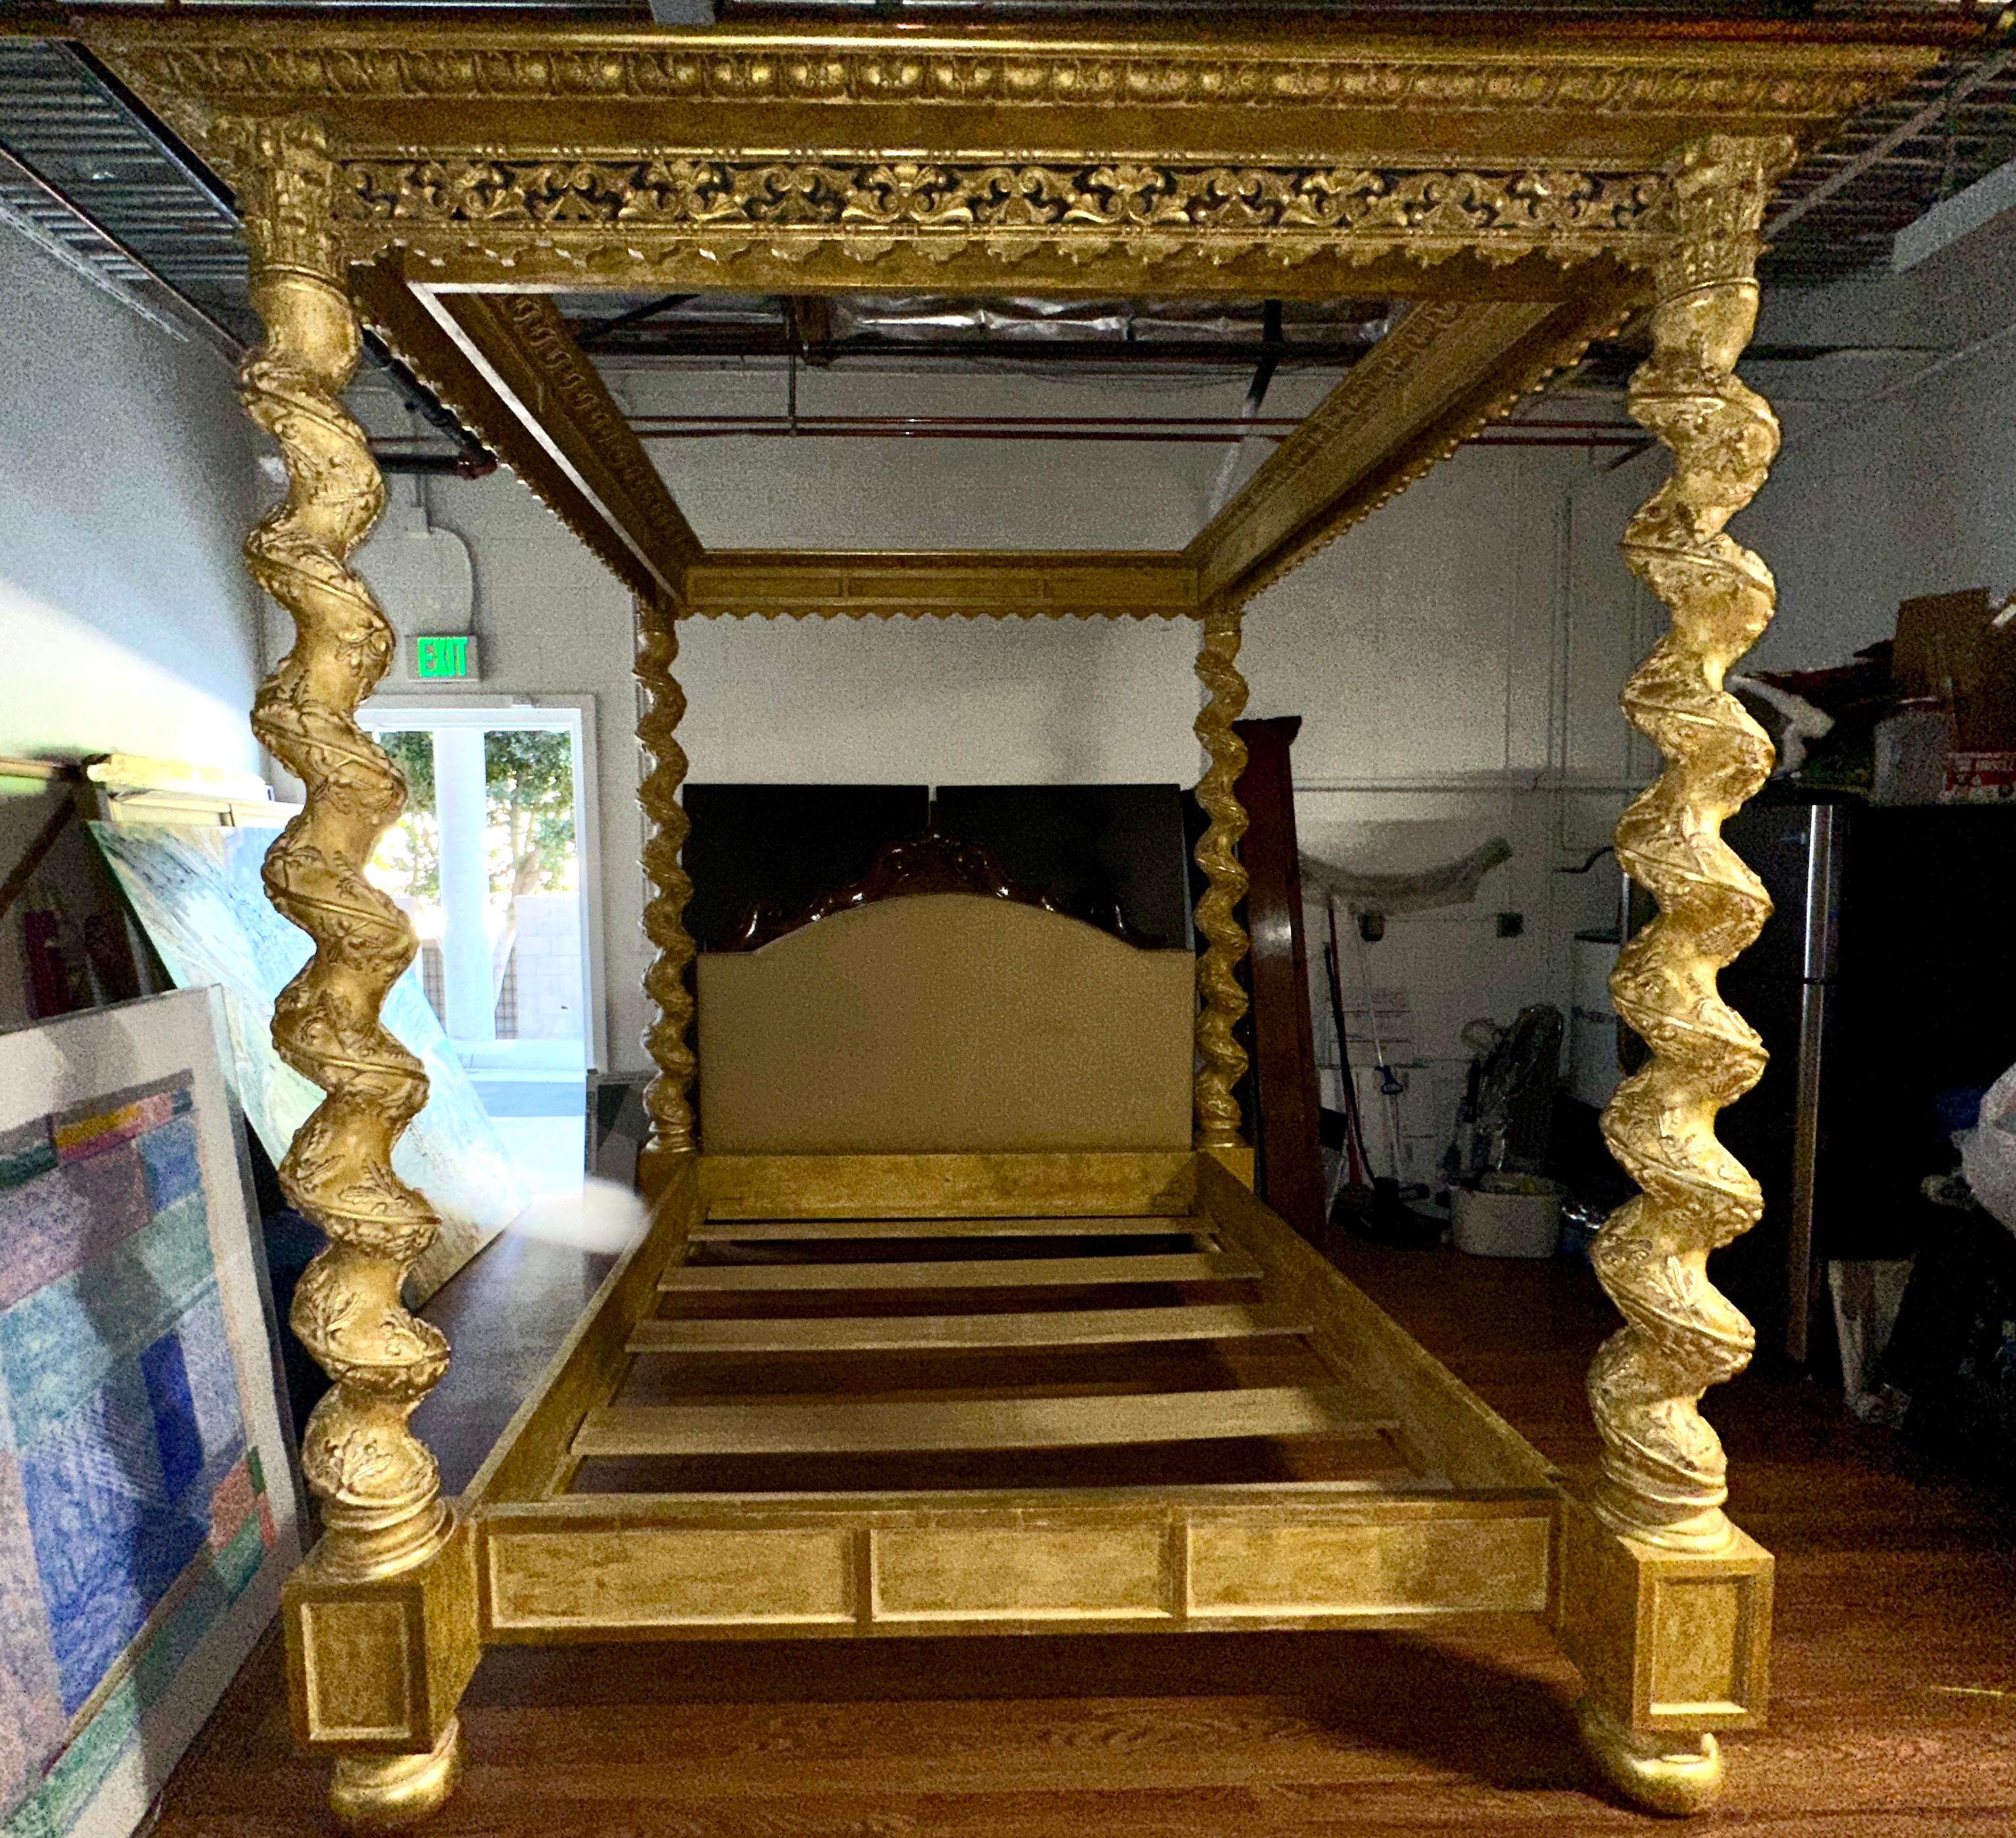 A magnificent Carved gilt Italian style 4 poster canopied bed. It features 4 twisted columns on the corners and an upholstered headboard. The interior dimensions are slightly over 72x84 inches which is a California King size. The bed was in a